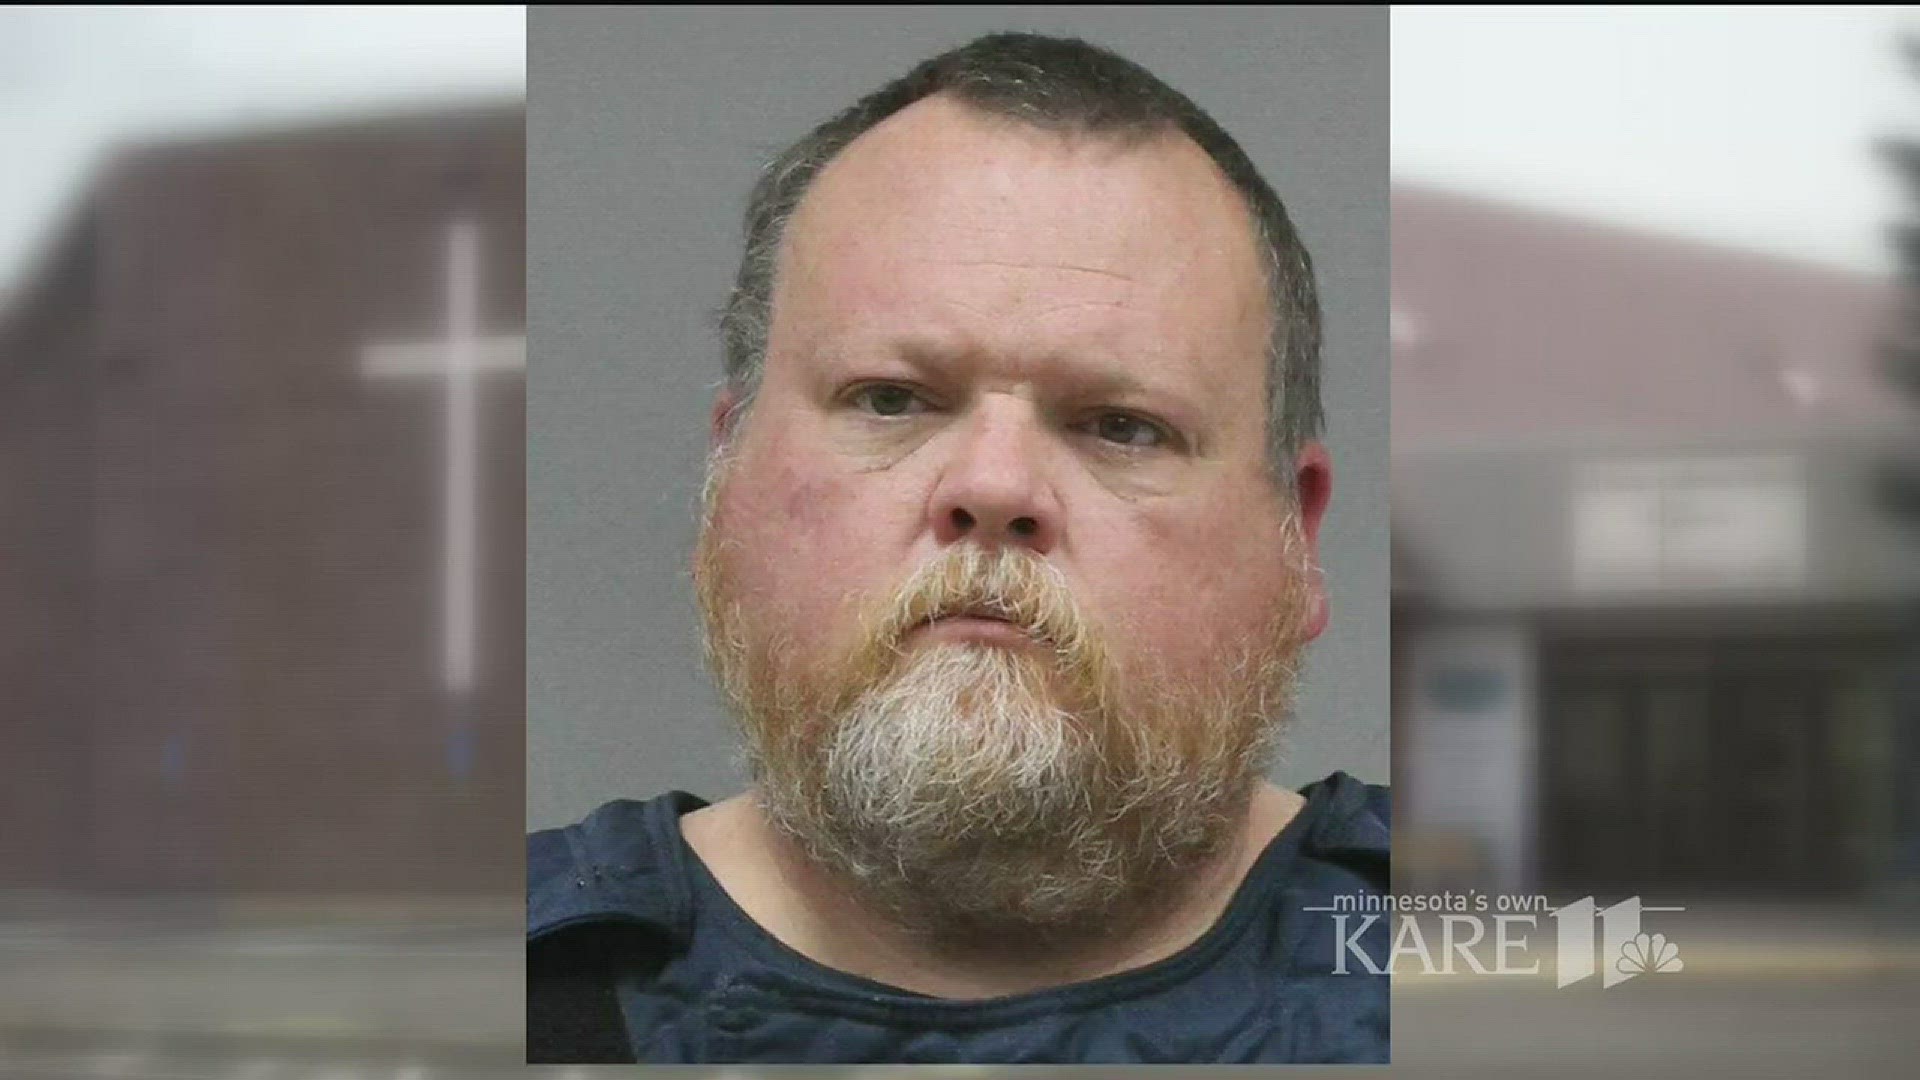 Boy Sex Video And Raping - Pastor charged for possessing child porn | kare11.com